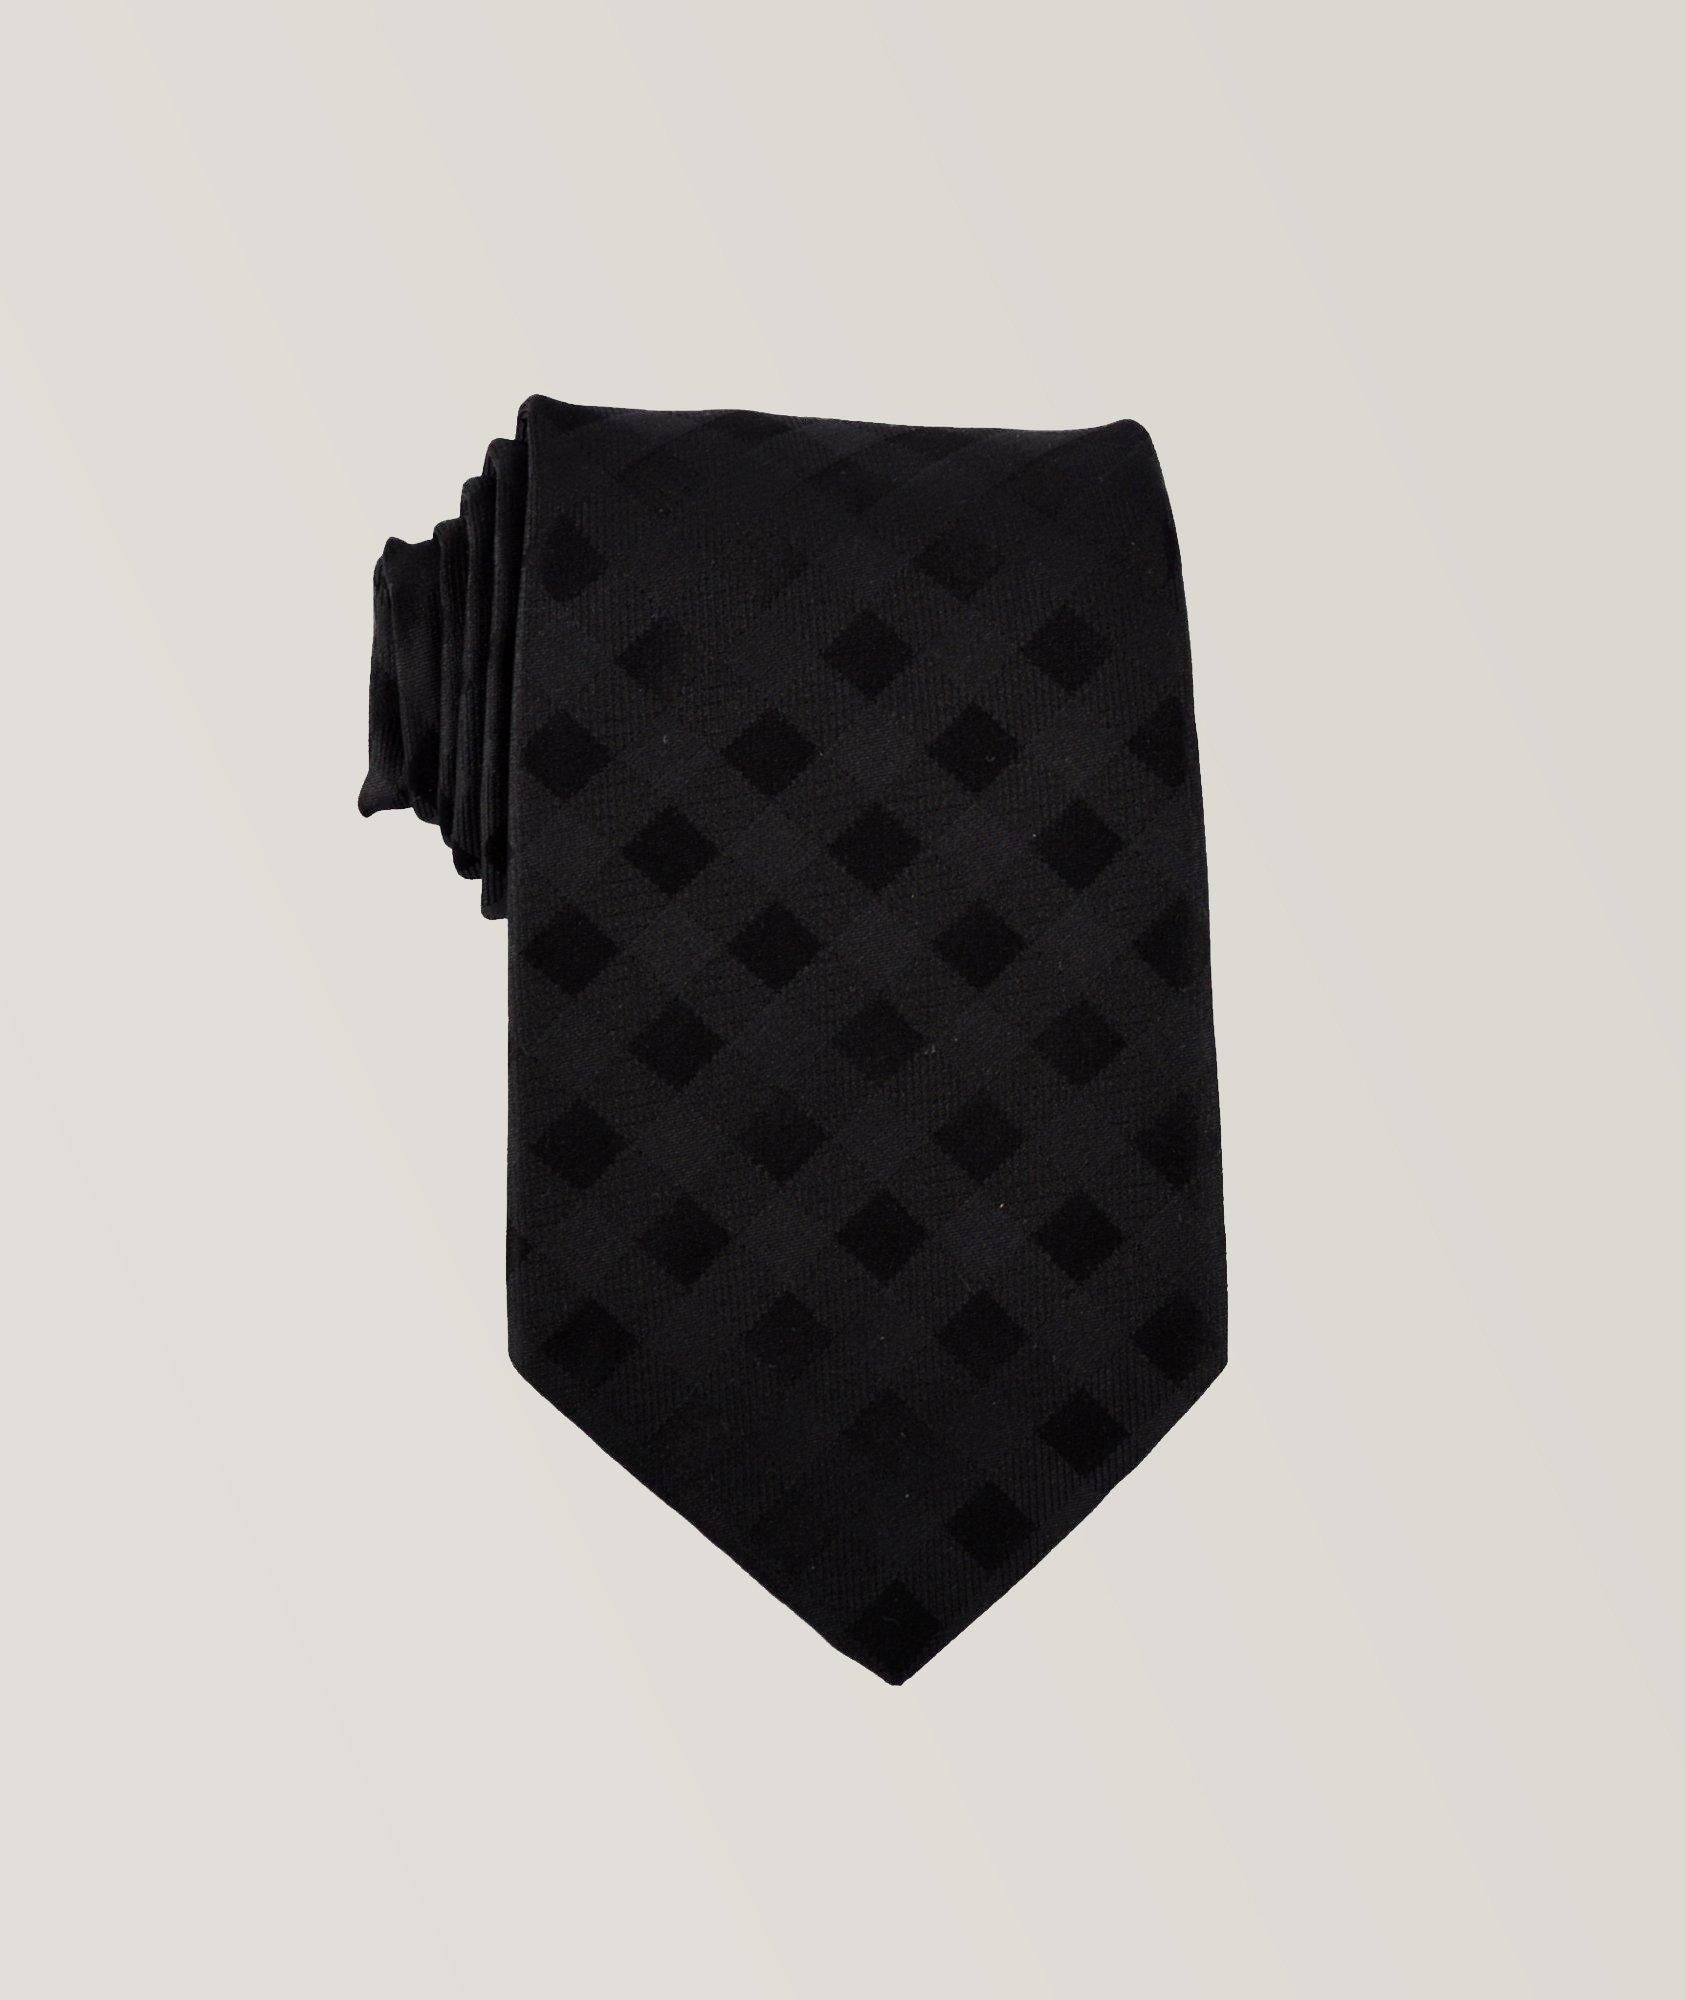 Gingham Check Tie image 0